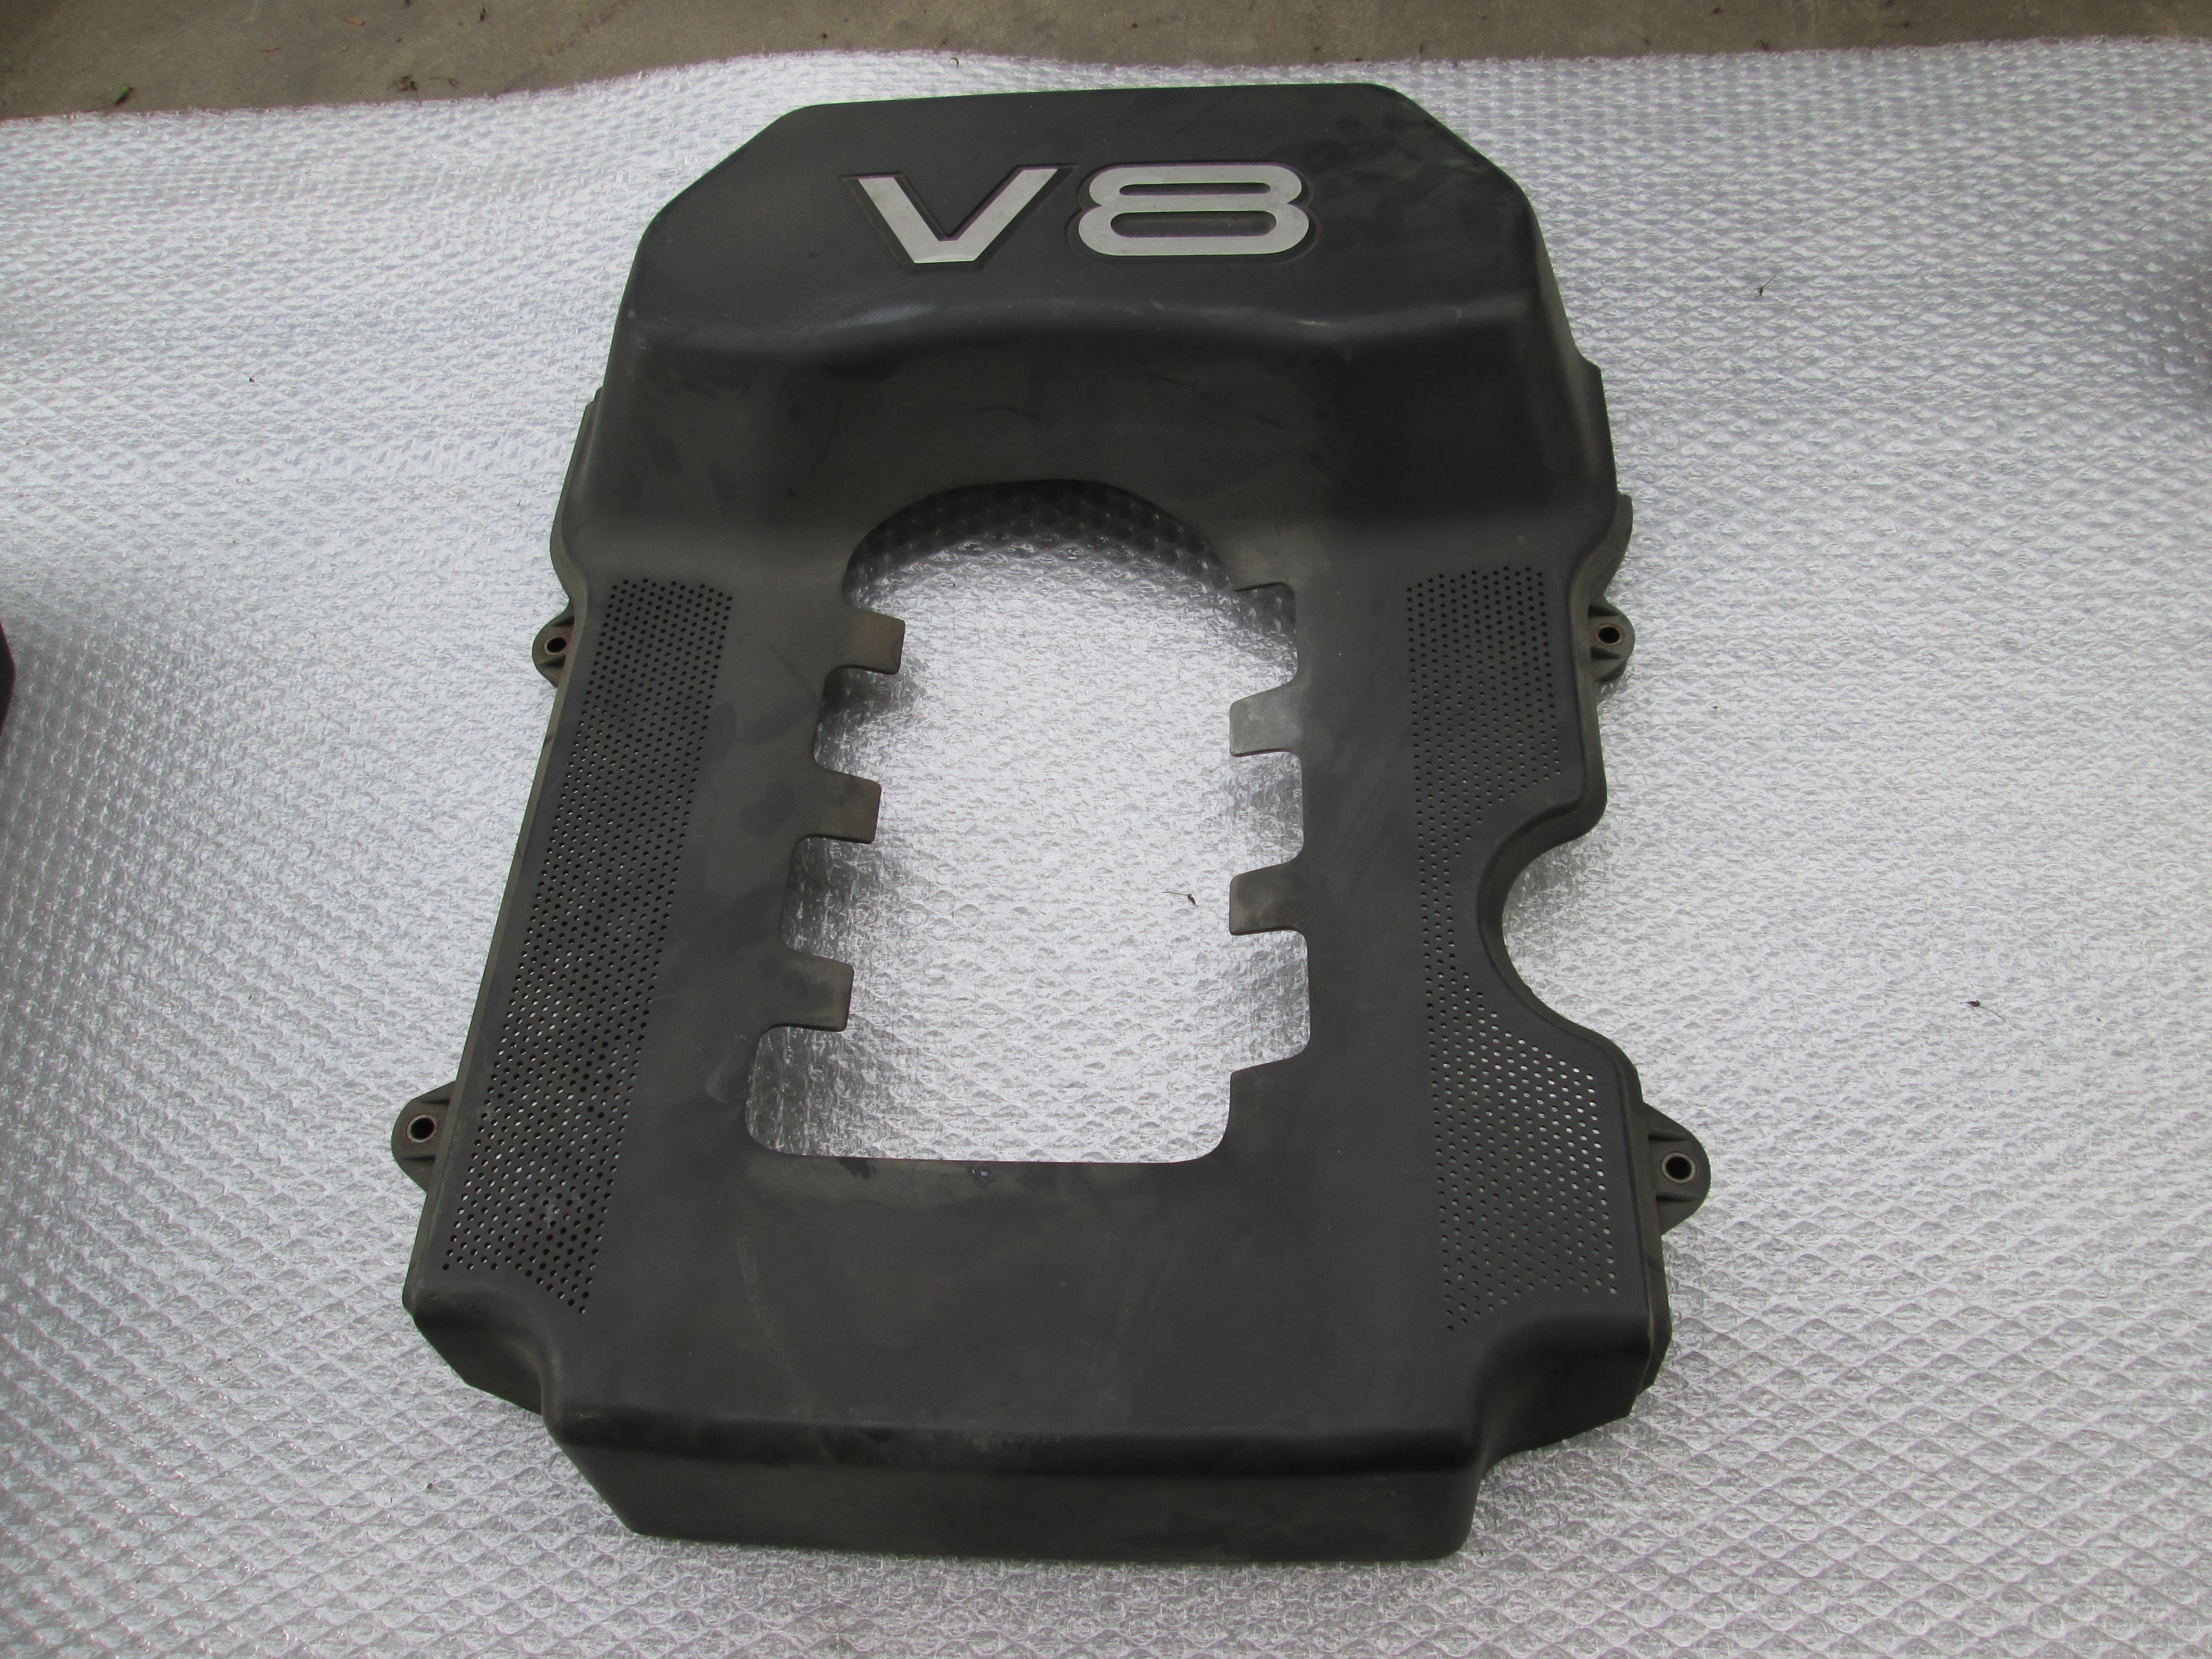 1A SERIES AUDI A8 4.2 V8 220 kW TIPTR. BER. (1994-2002) REPLACEMENT COVER ENGINE COVER 077103935